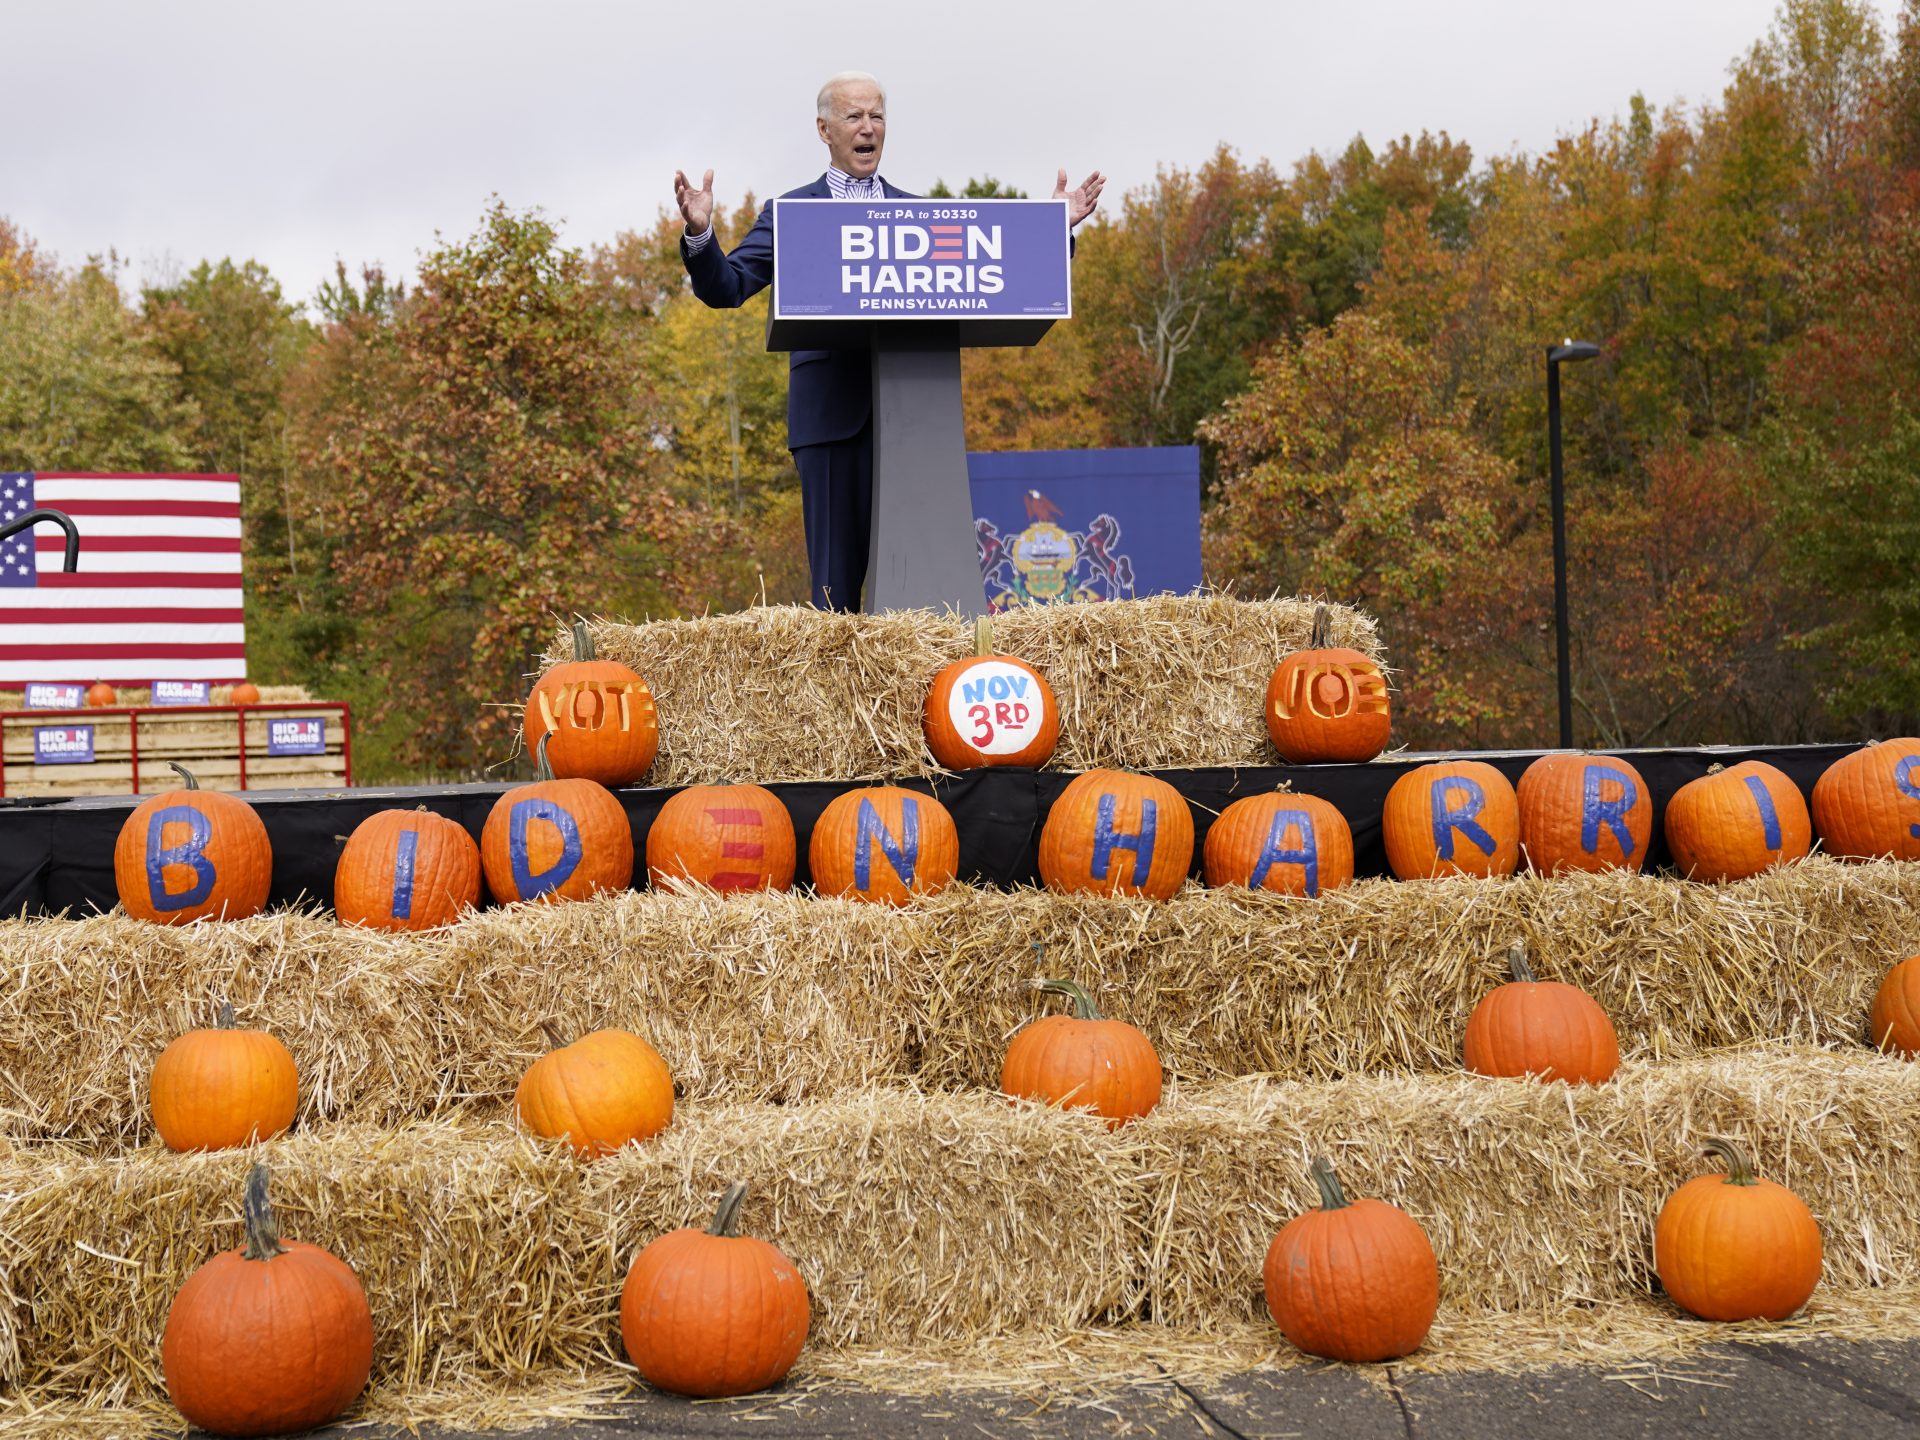 Democratic presidential candidate former Vice President Joe Biden speaks at a campaign stop at Bucks County Community College, Saturday, Oct. 24, 2020, in Bristol, Pa.